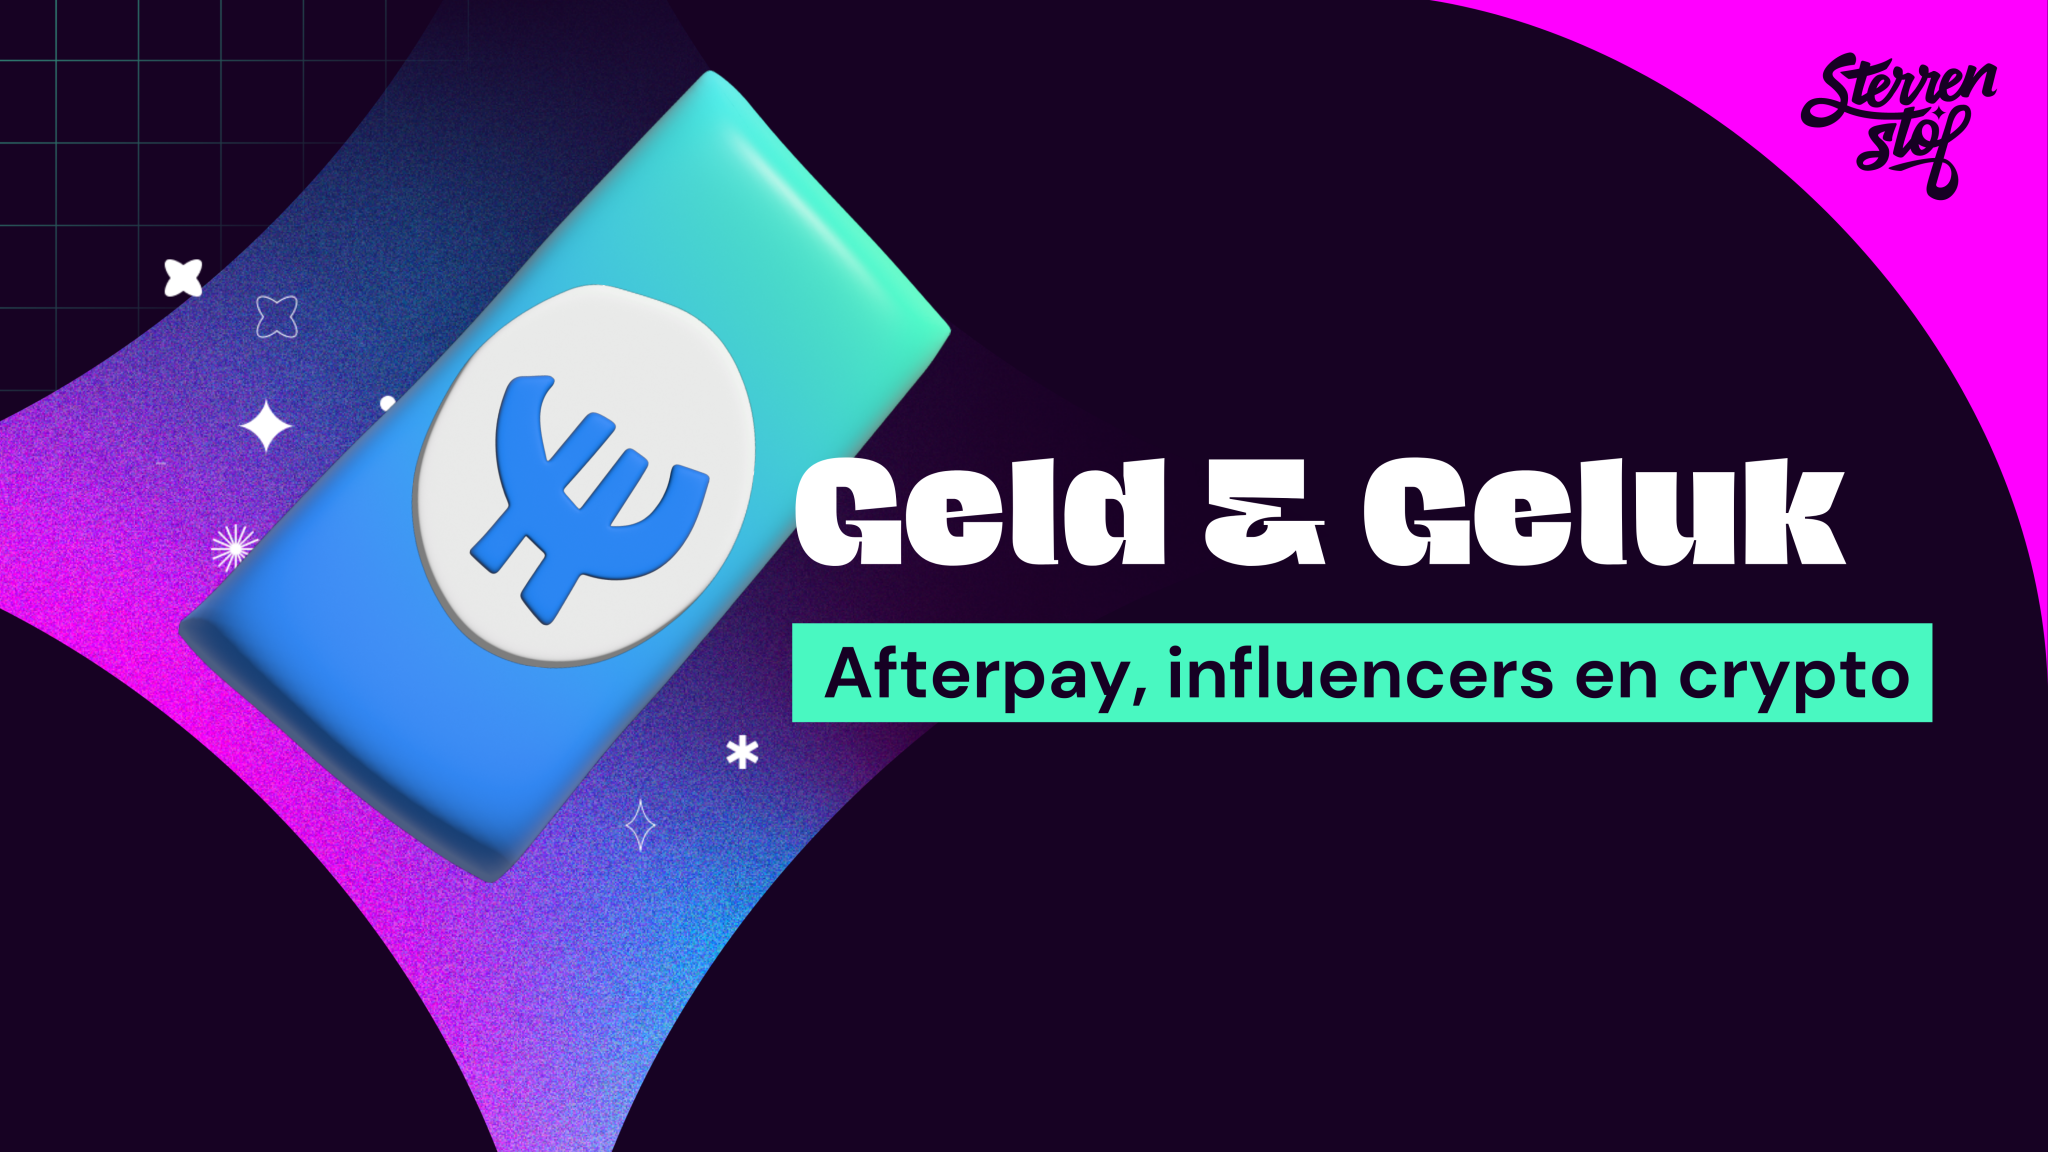 Geld & Geluk: Afterpay, Influencers & Crypto's